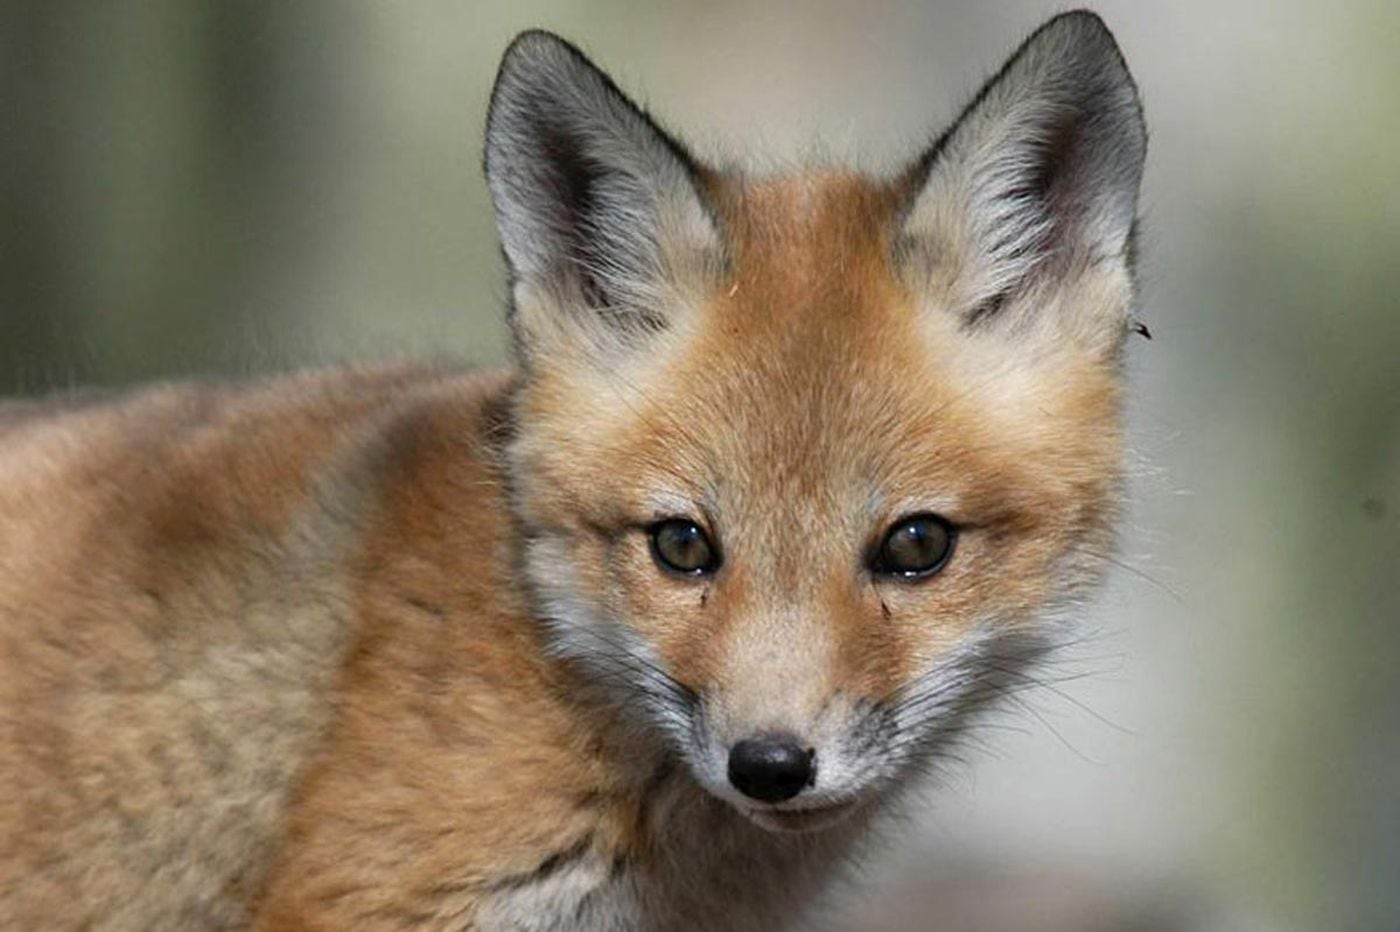 Police Red Foxes Causing Trouble In Bucks Neighborhoods